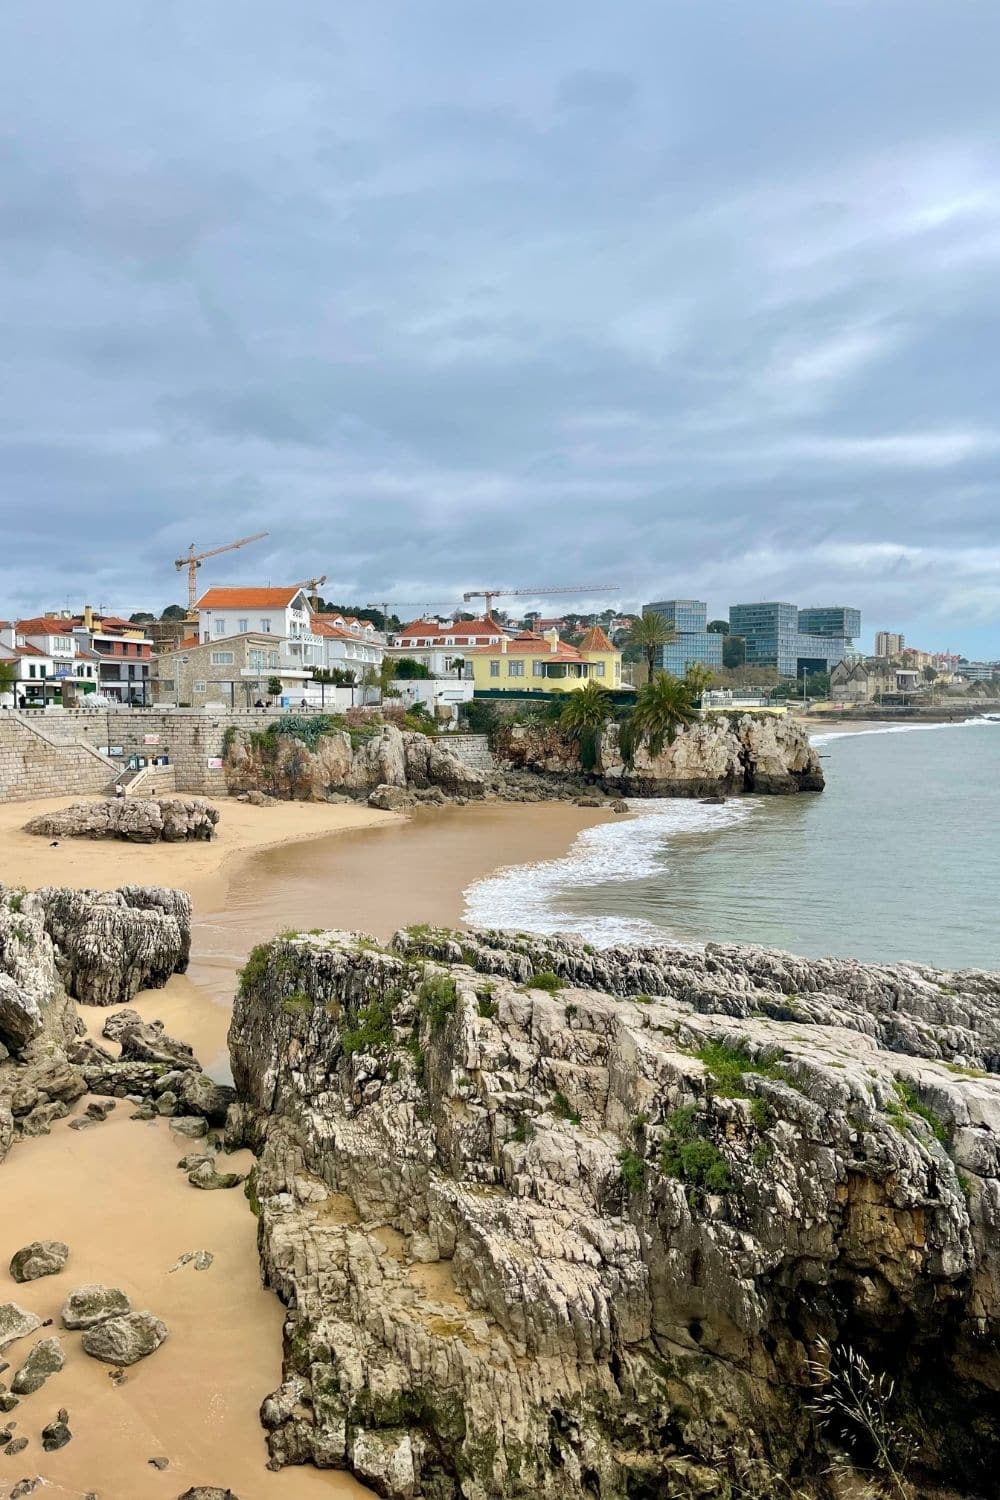 Scenic view of Cascais coastline with rugged rocks and a small sandy beach, contrasting with the urban backdrop featuring traditional and modern buildings under a cloudy sky, showcasing the town's natural and architectural beauty.